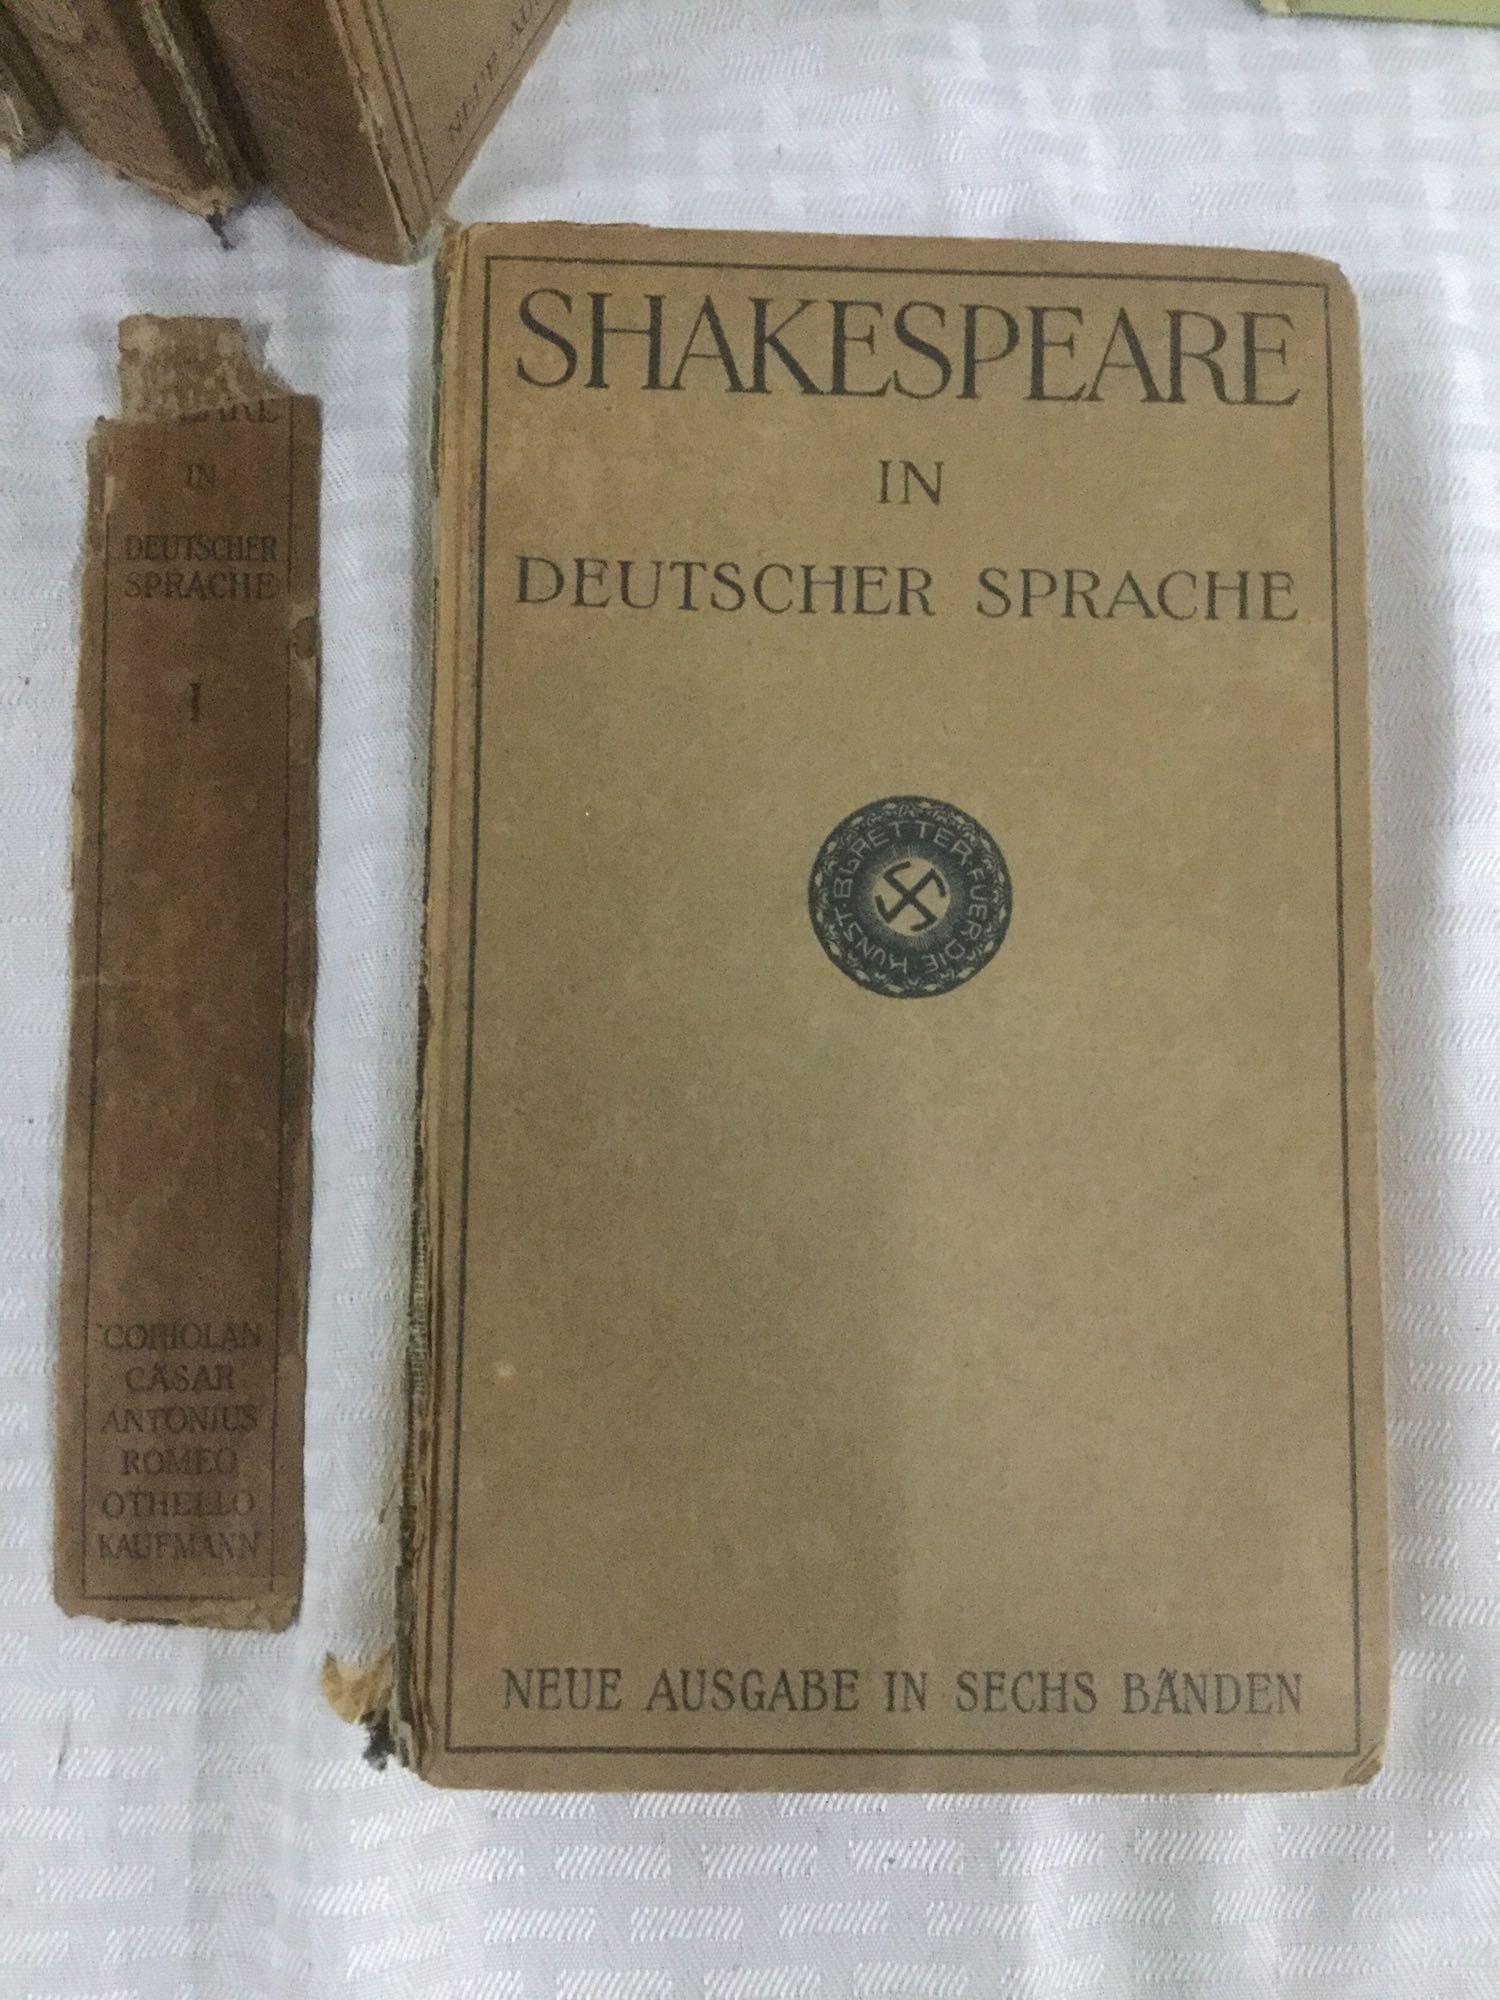 8 Rare books - 6 volume set "Shakespeare in German" 1920 w/ Swastika on cover (as is) + 2 more